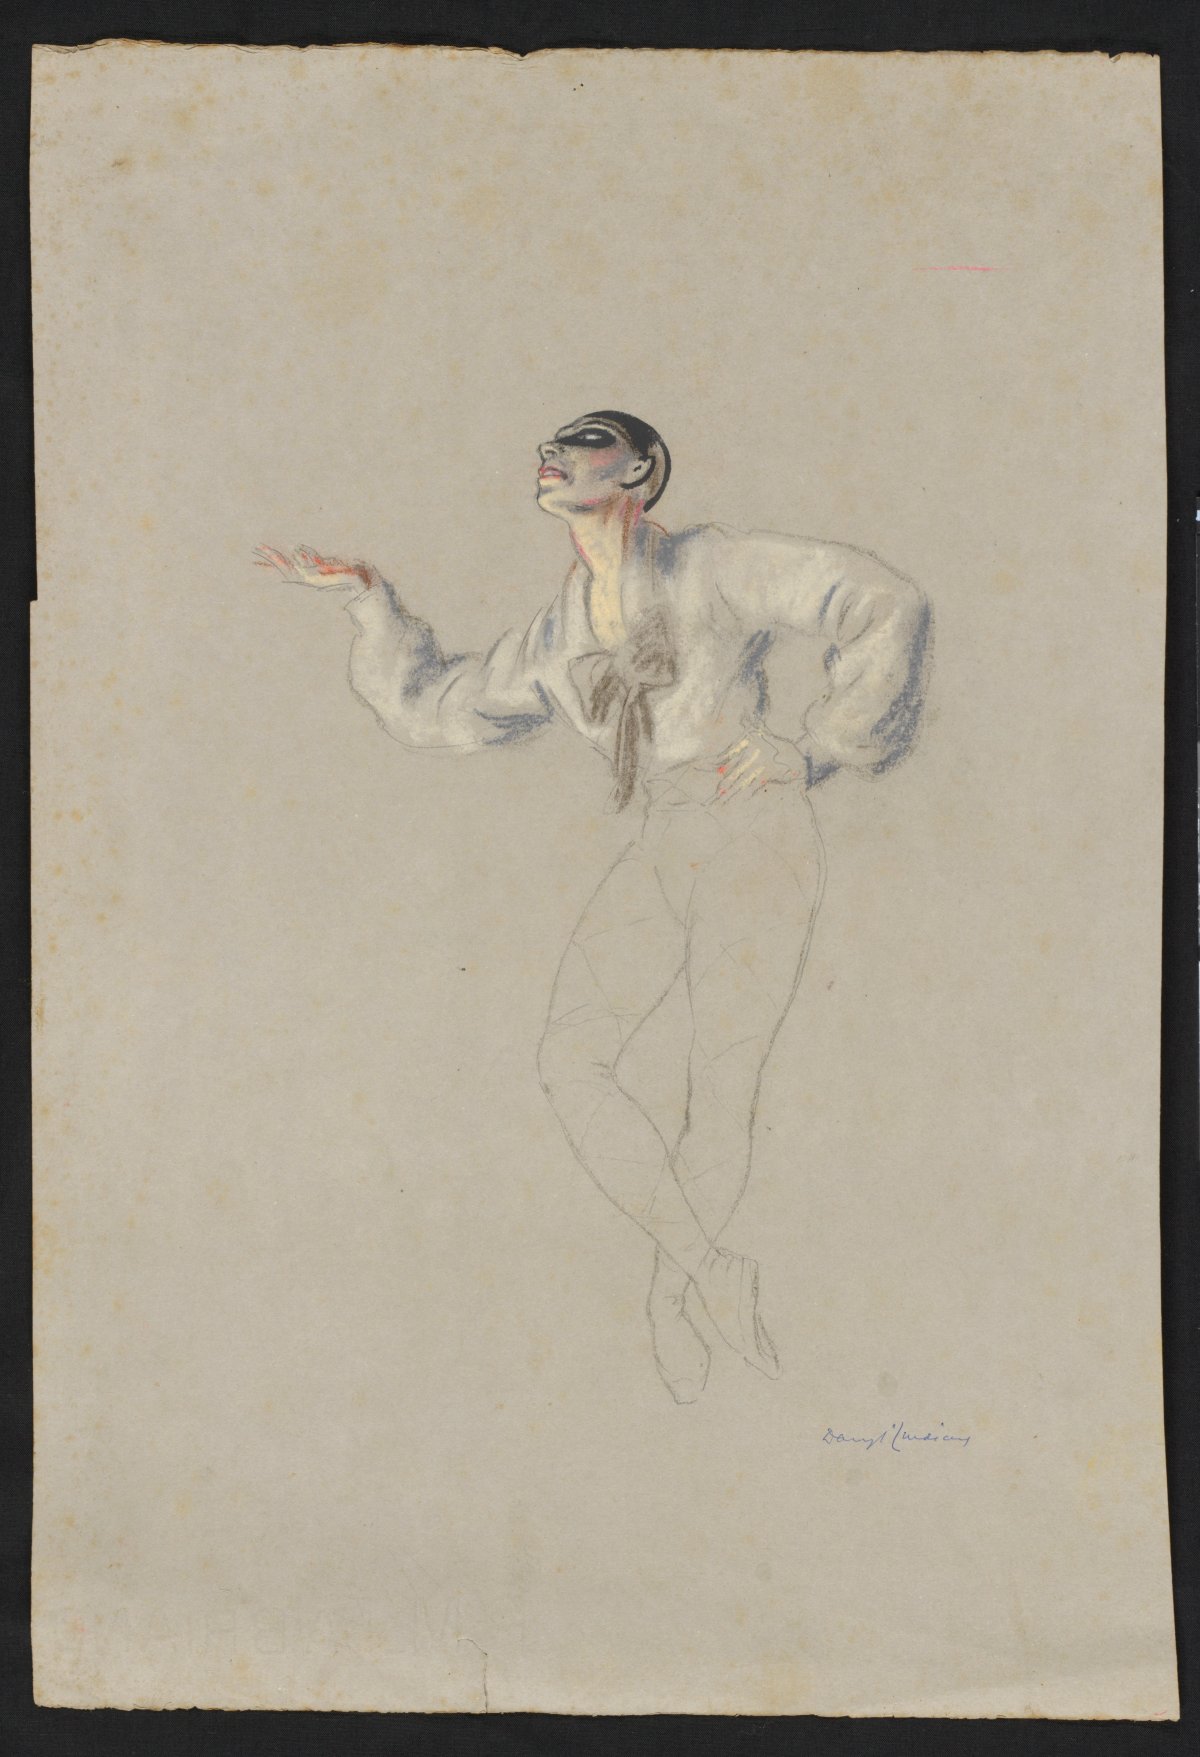 An unfinished sketch of a dancer striking a pose. He is wearing a white blouse, his legs are not finished. He has highly contrasting makeup on.